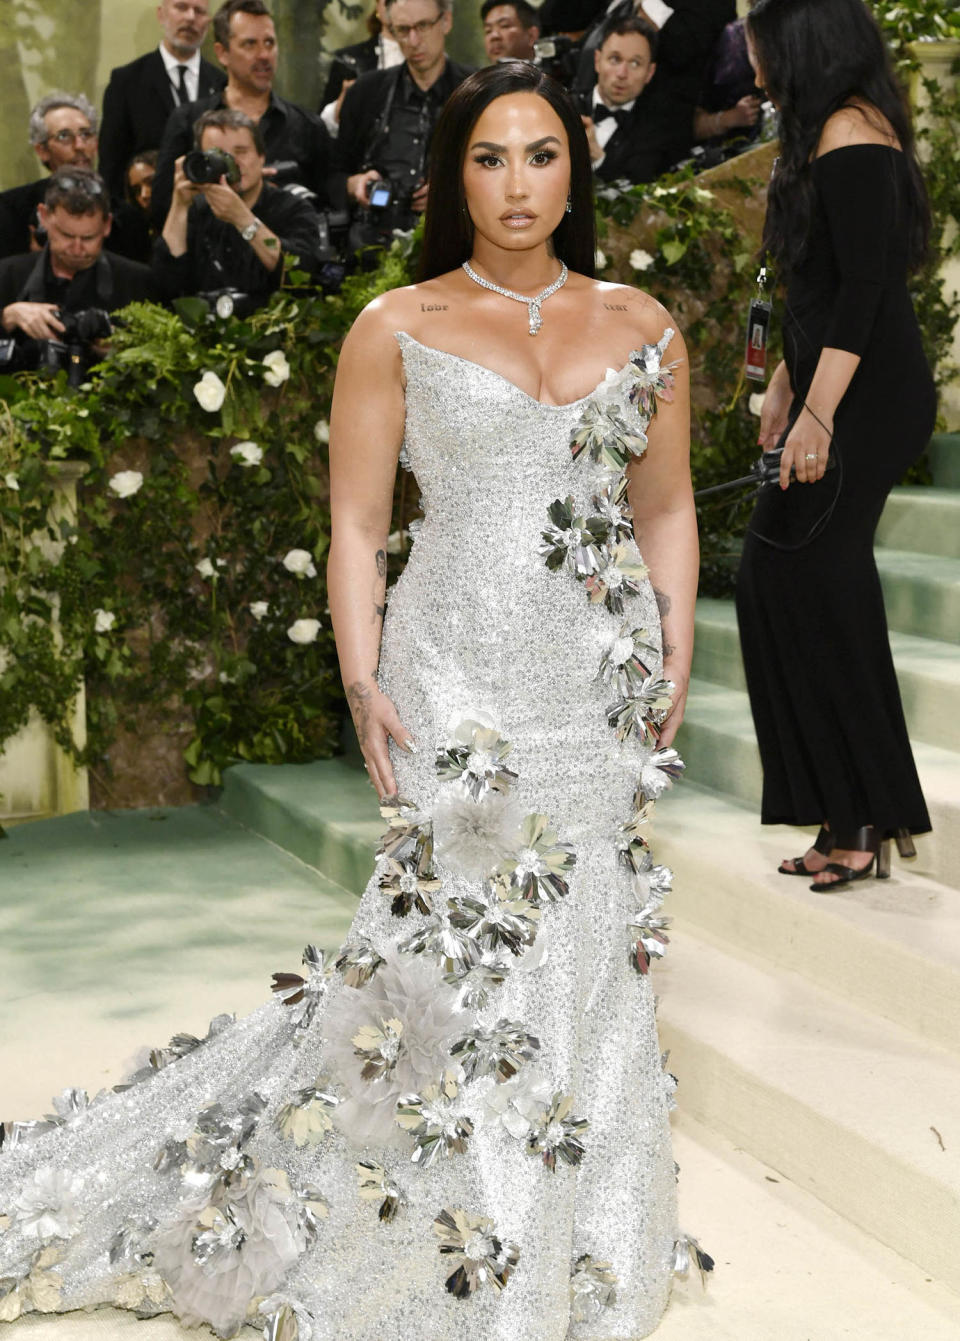 Demi Lovato attends her 1st Met Gala since calling it 'terrible' 6 ...